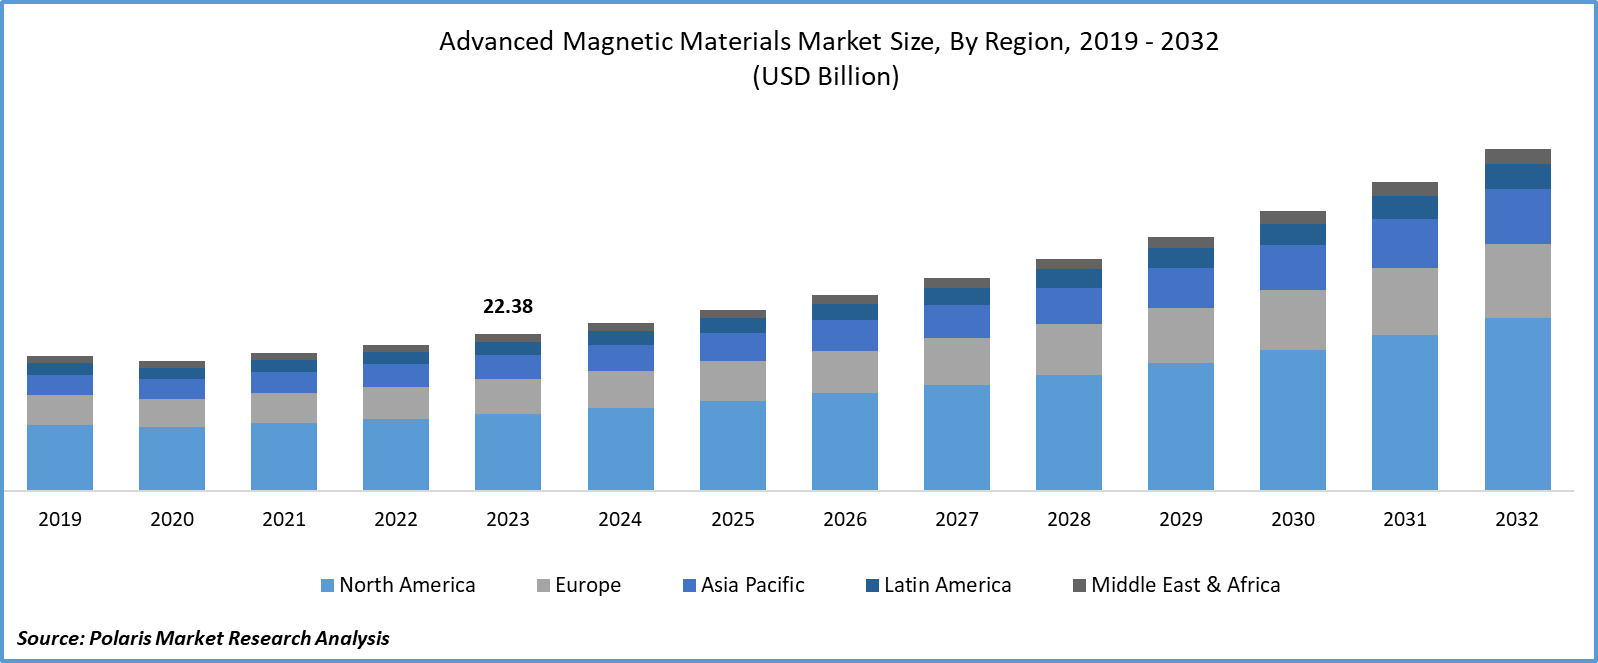 Advanced Magnetic Materials Market Size